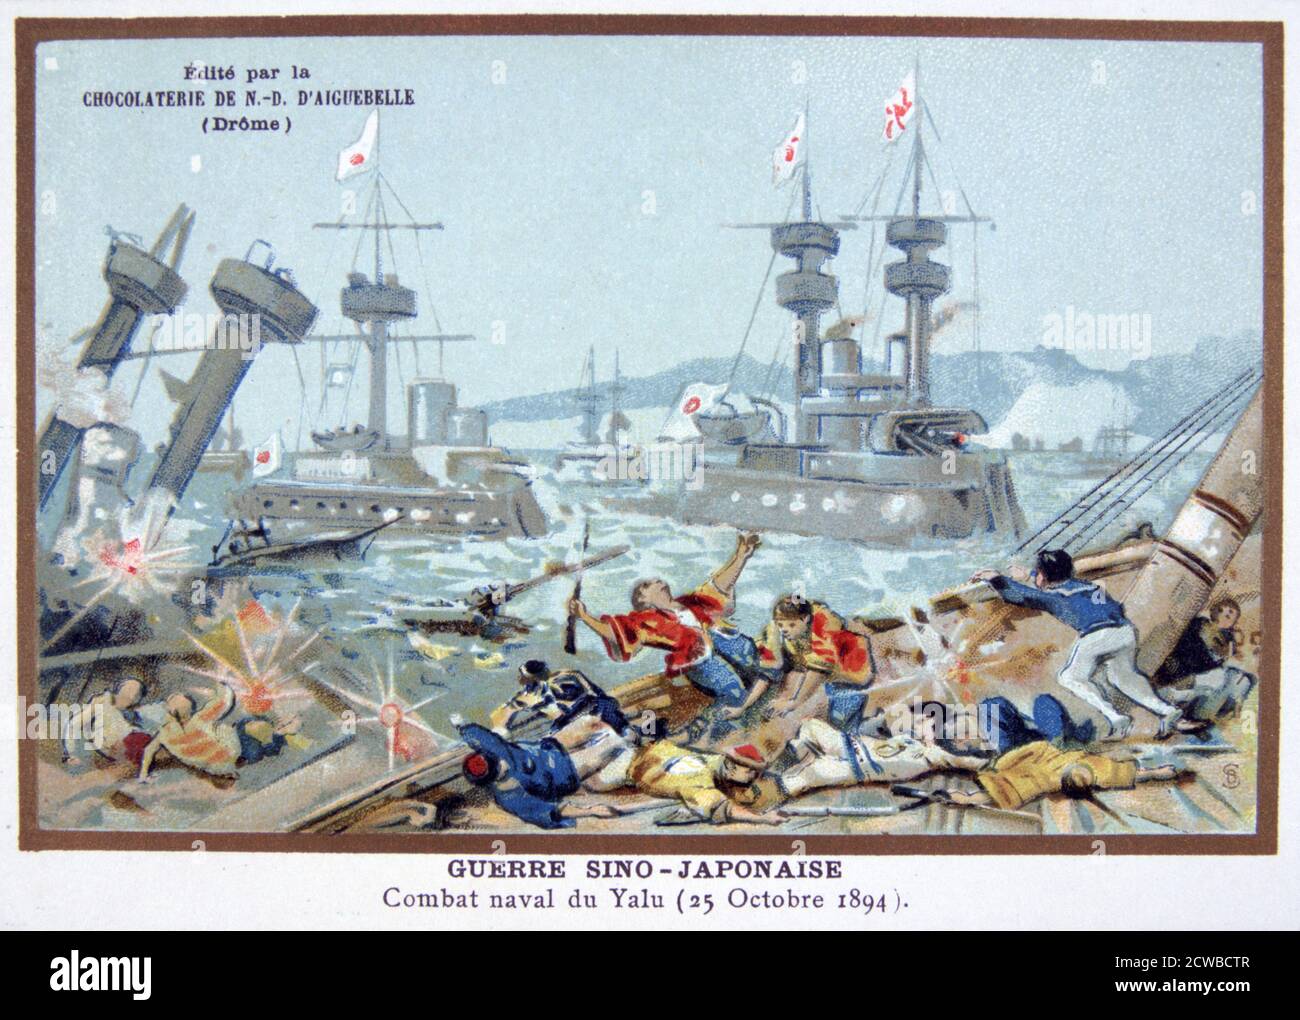 Battle of the Yalu River, Sino-Japanese War, 25 October 1894. The First Sino-Japanese War was fought in 1894-1895 between Qing Dynasty China and Meiji Japan over the control of Korea. The victory for Japan emphasised the decline of Chinese power and the rise of Japan since it opened up to the West in the 1850s. Part of a Private Collection and the artist is unknown. Stock Photo